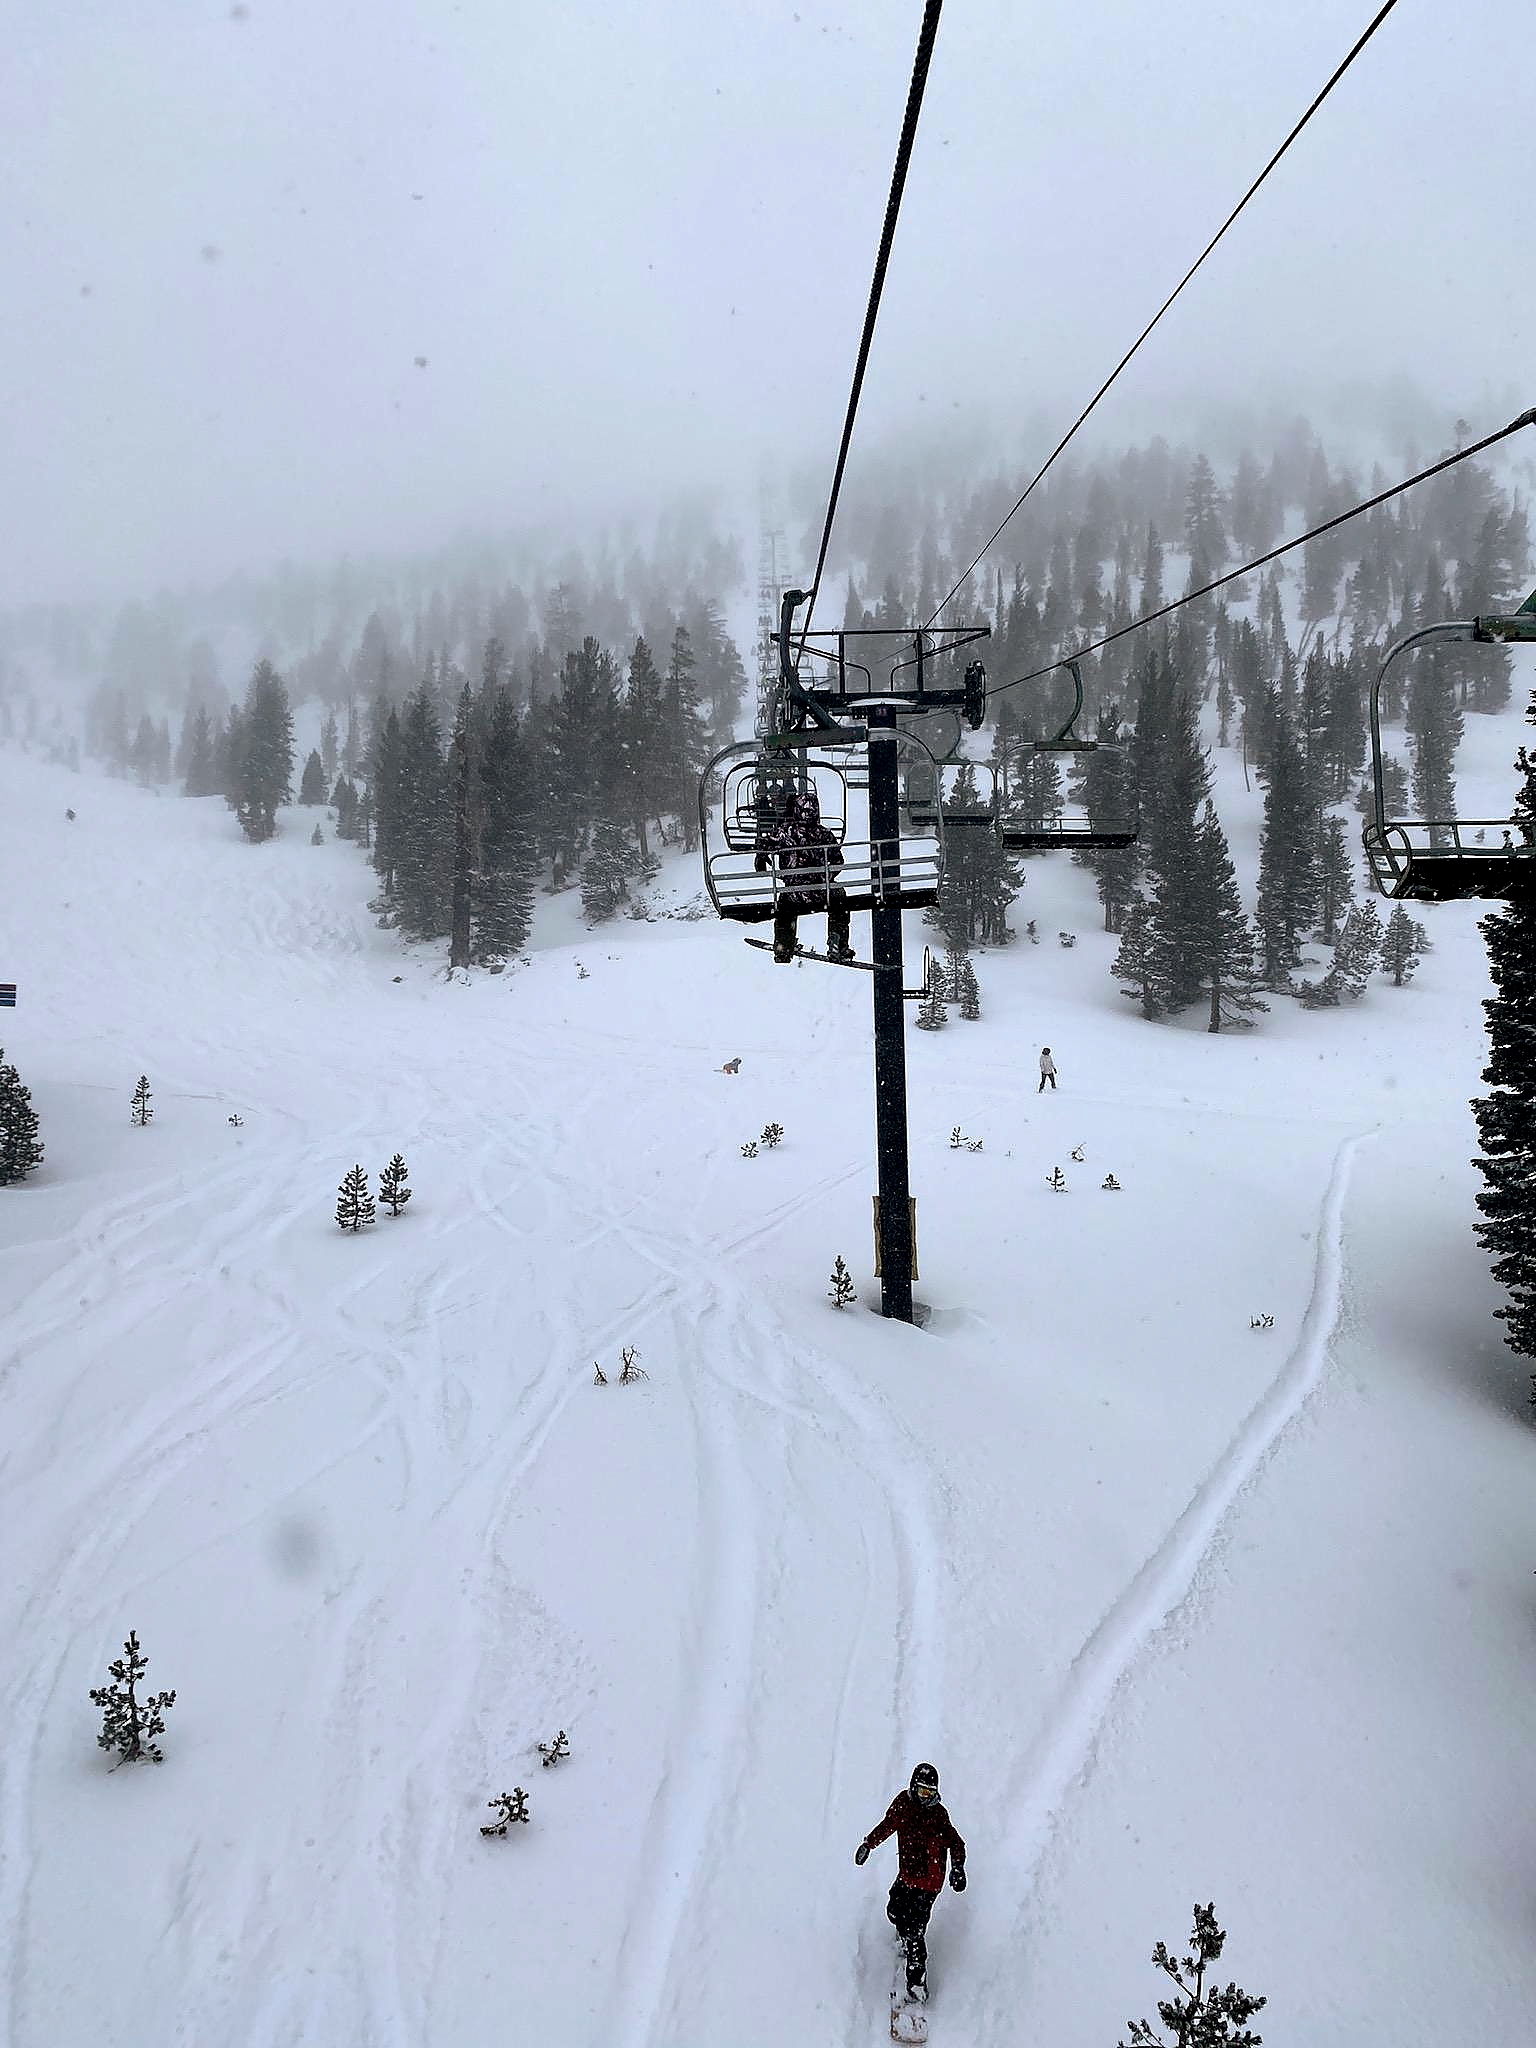 Chair 22 on Wednesday - Photo from Flaskman